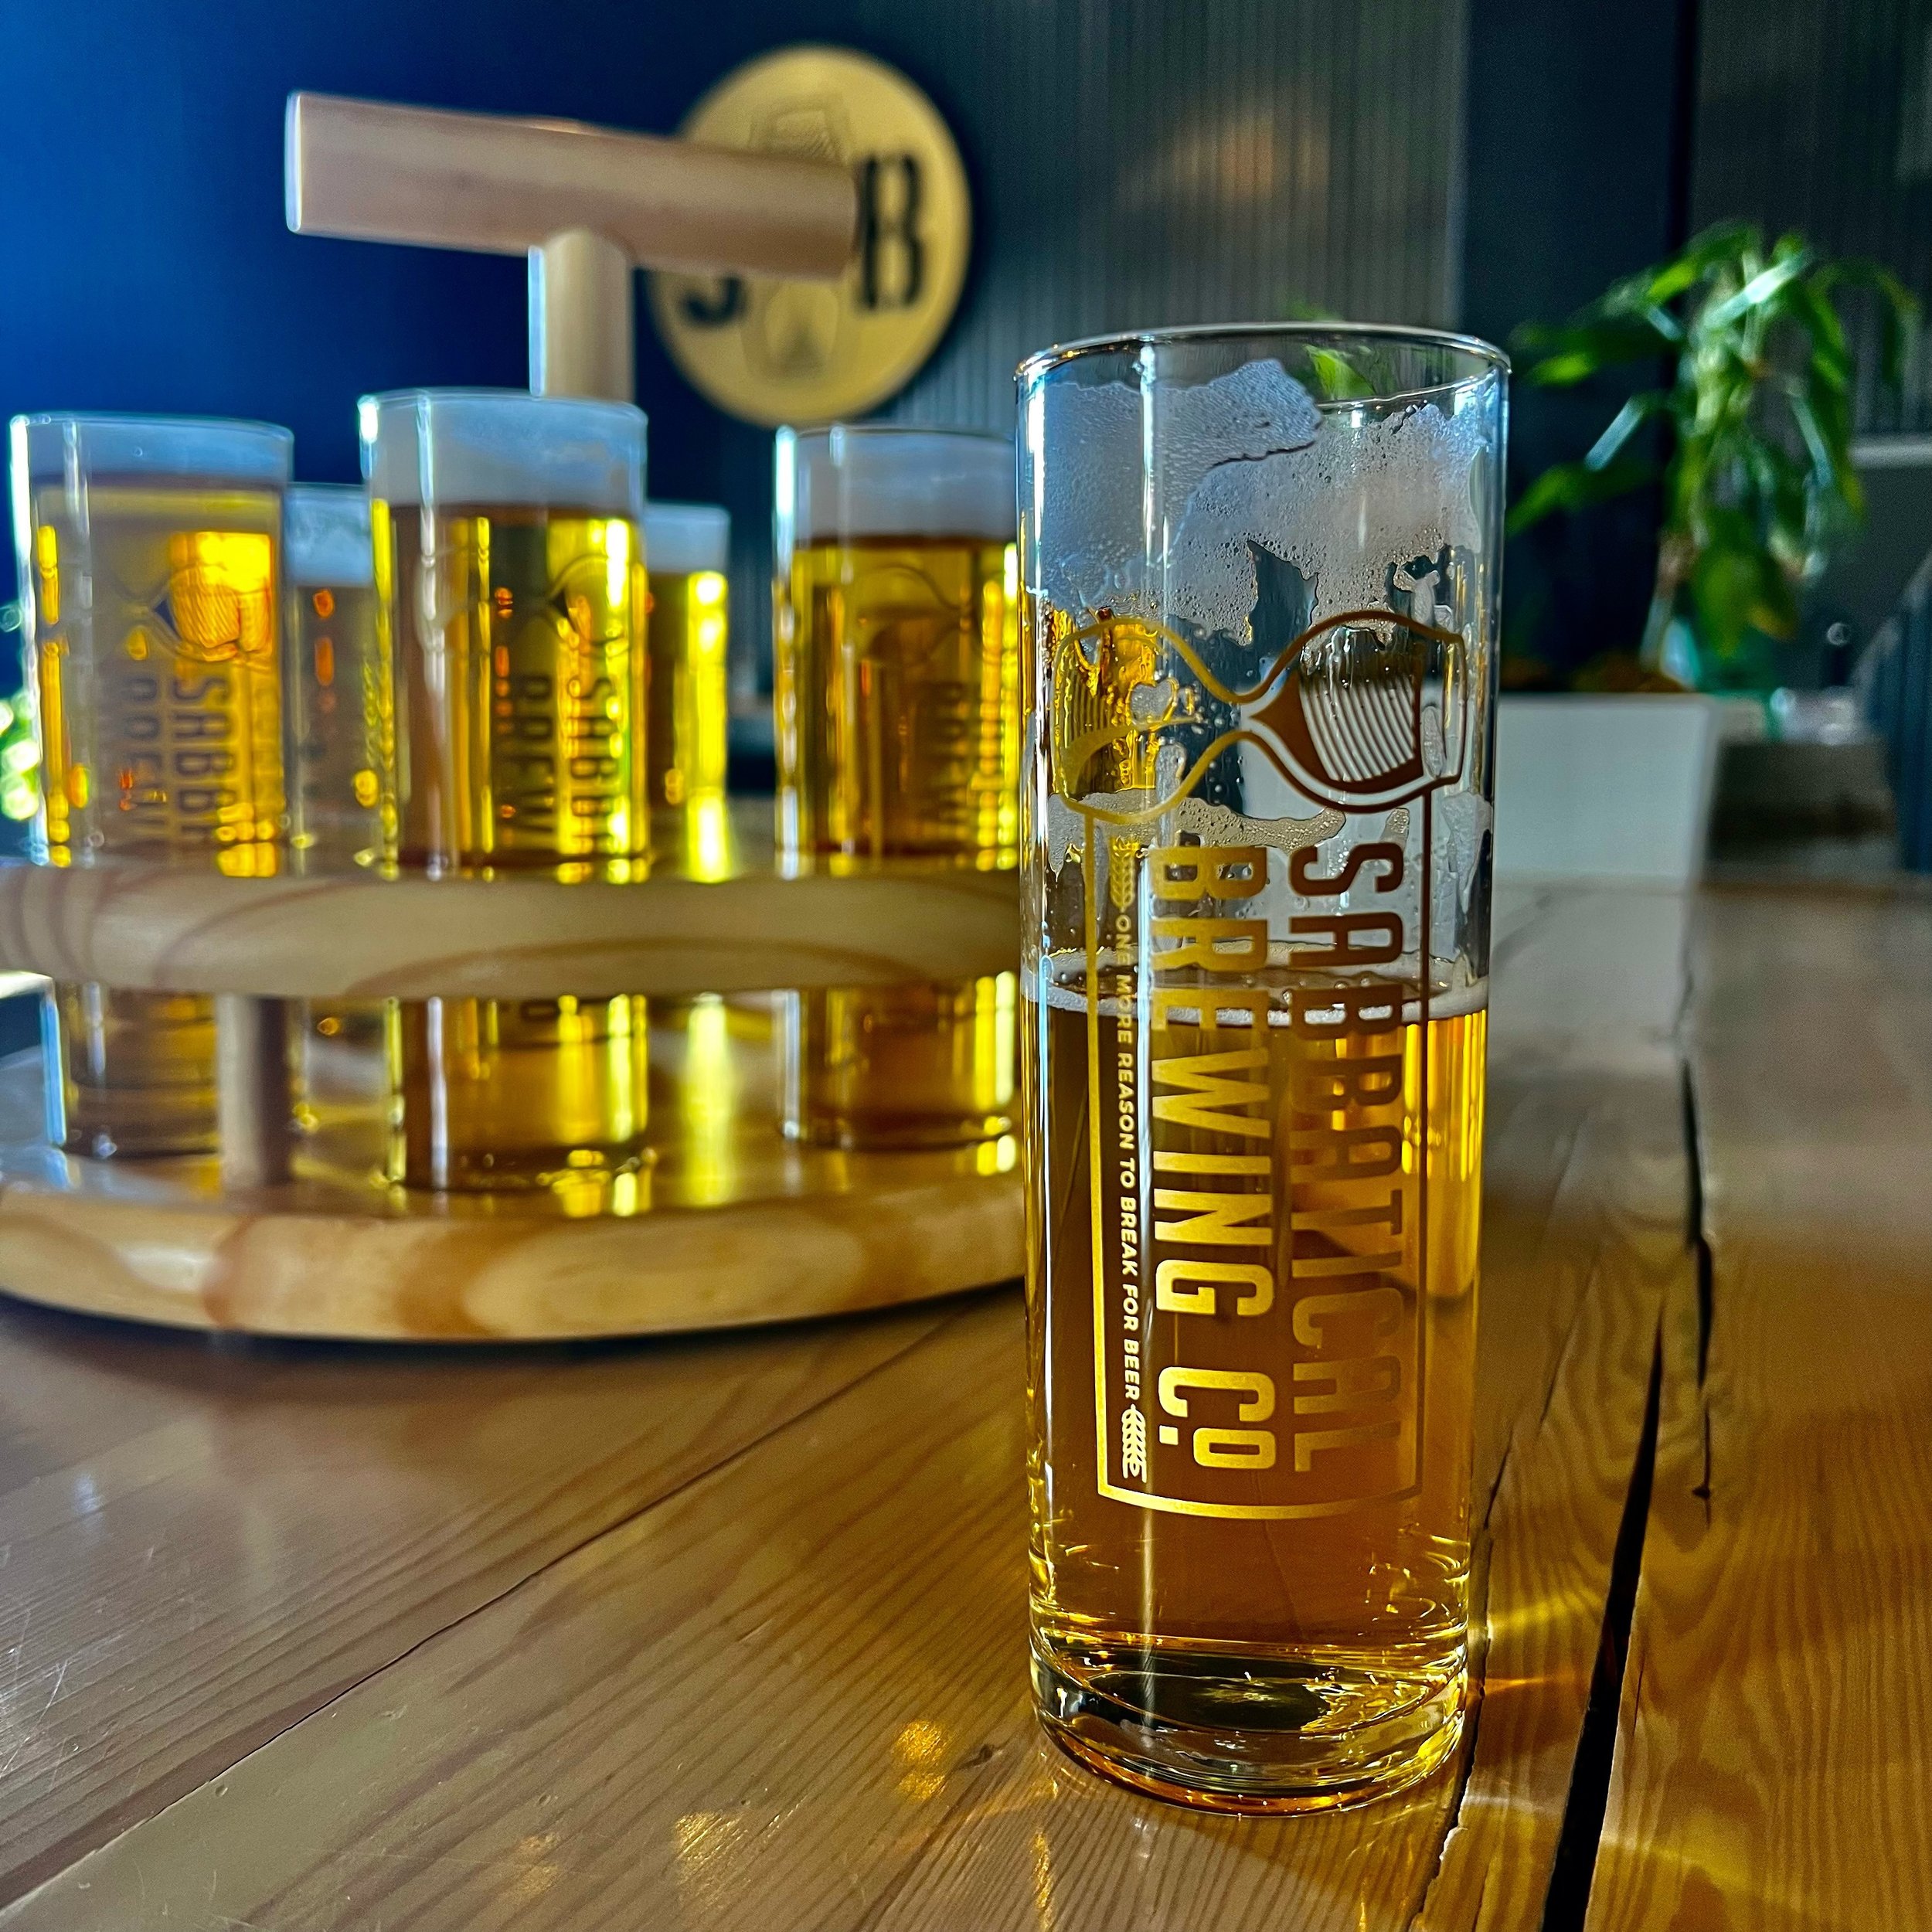 𝗝𝗨𝗦𝗧 𝗚𝗘𝗧 𝗧𝗛𝗘 𝗞𝗥𝗔̈𝗡𝗭👌🏼

Whether you&rsquo;re flying solo or leading the flock, nothing relieves the stress of decision fatigue like a Kr&auml;nz full of our K&ouml;lsch-style ale, All the K&ouml;&ouml;l Kids!

At only $2/pour, there&r